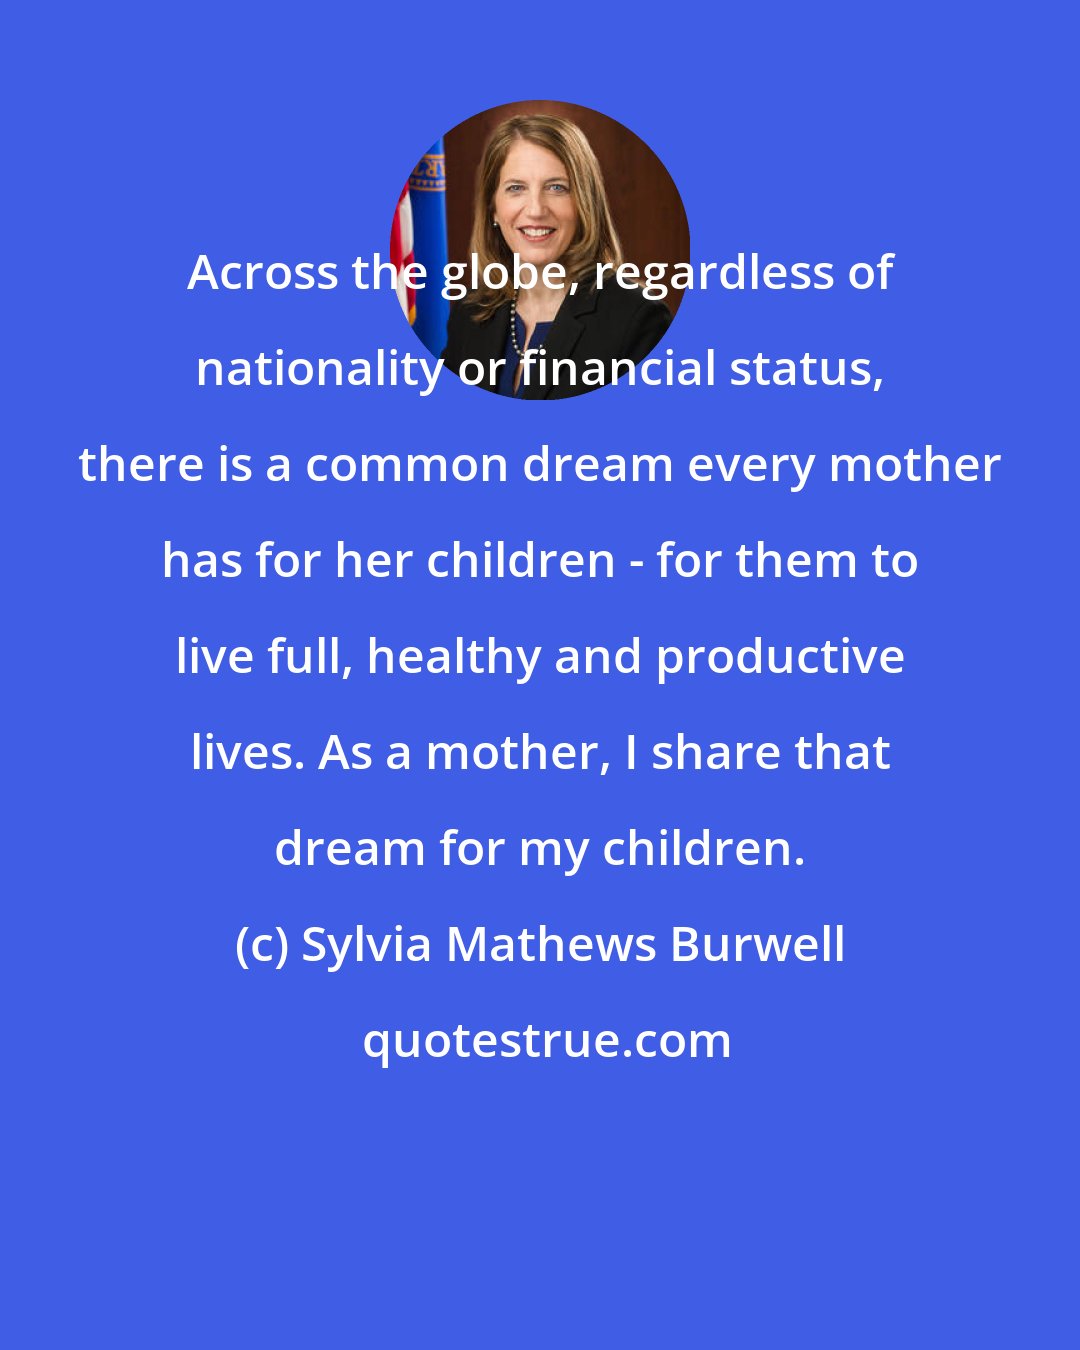 Sylvia Mathews Burwell: Across the globe, regardless of nationality or financial status, there is a common dream every mother has for her children - for them to live full, healthy and productive lives. As a mother, I share that dream for my children.